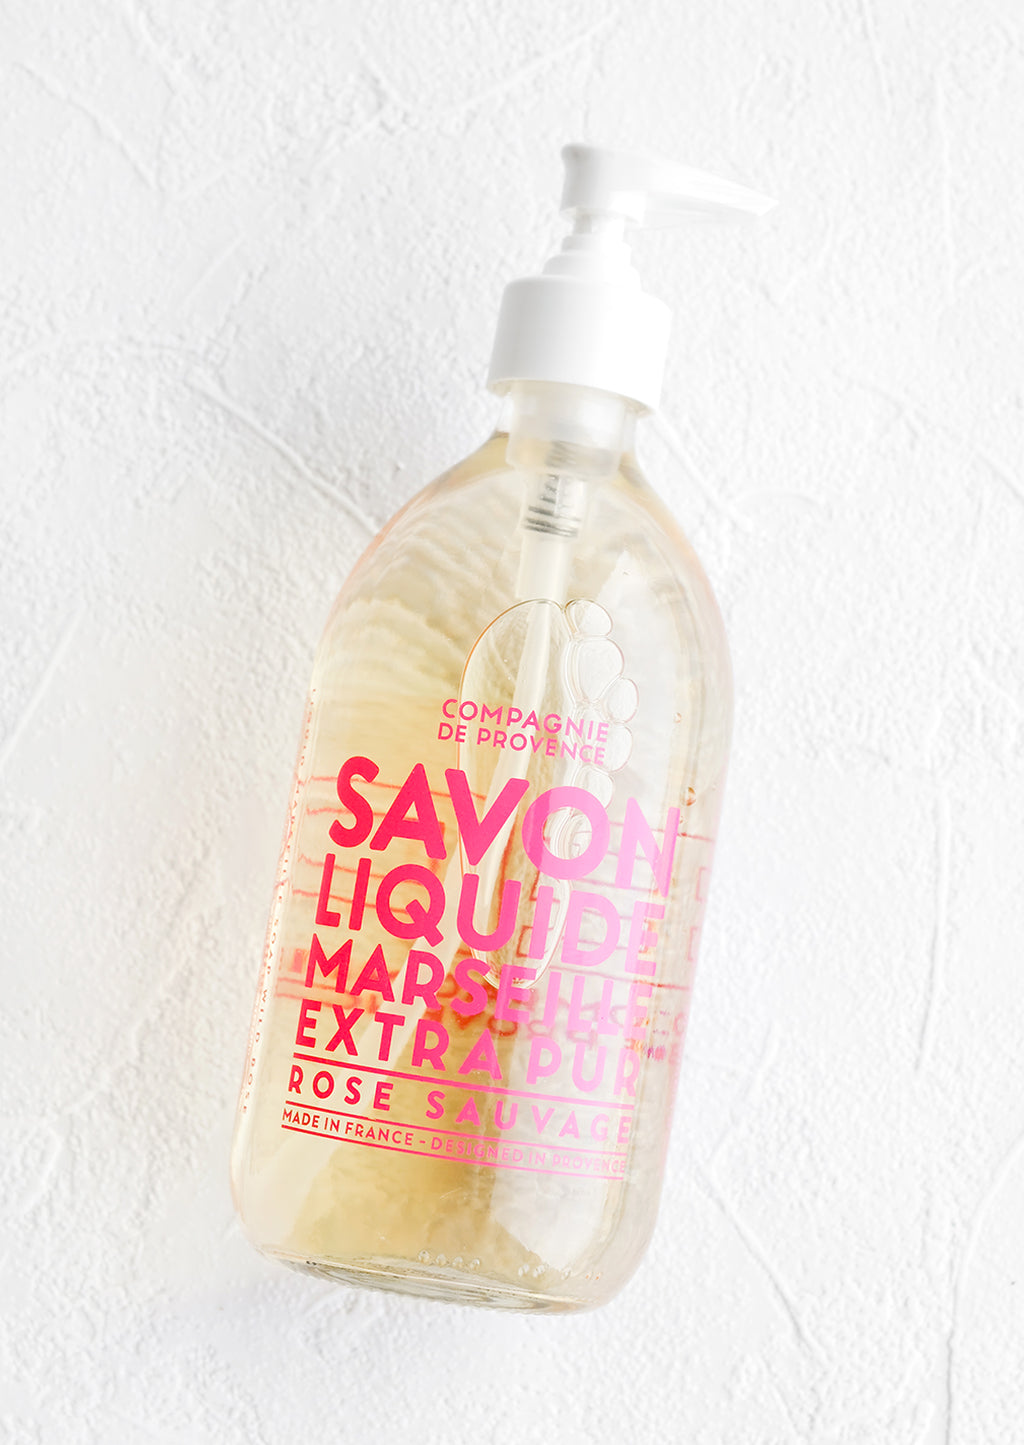 Wild Rose: A clear glass soap bottle with bold pink text printed on bottle